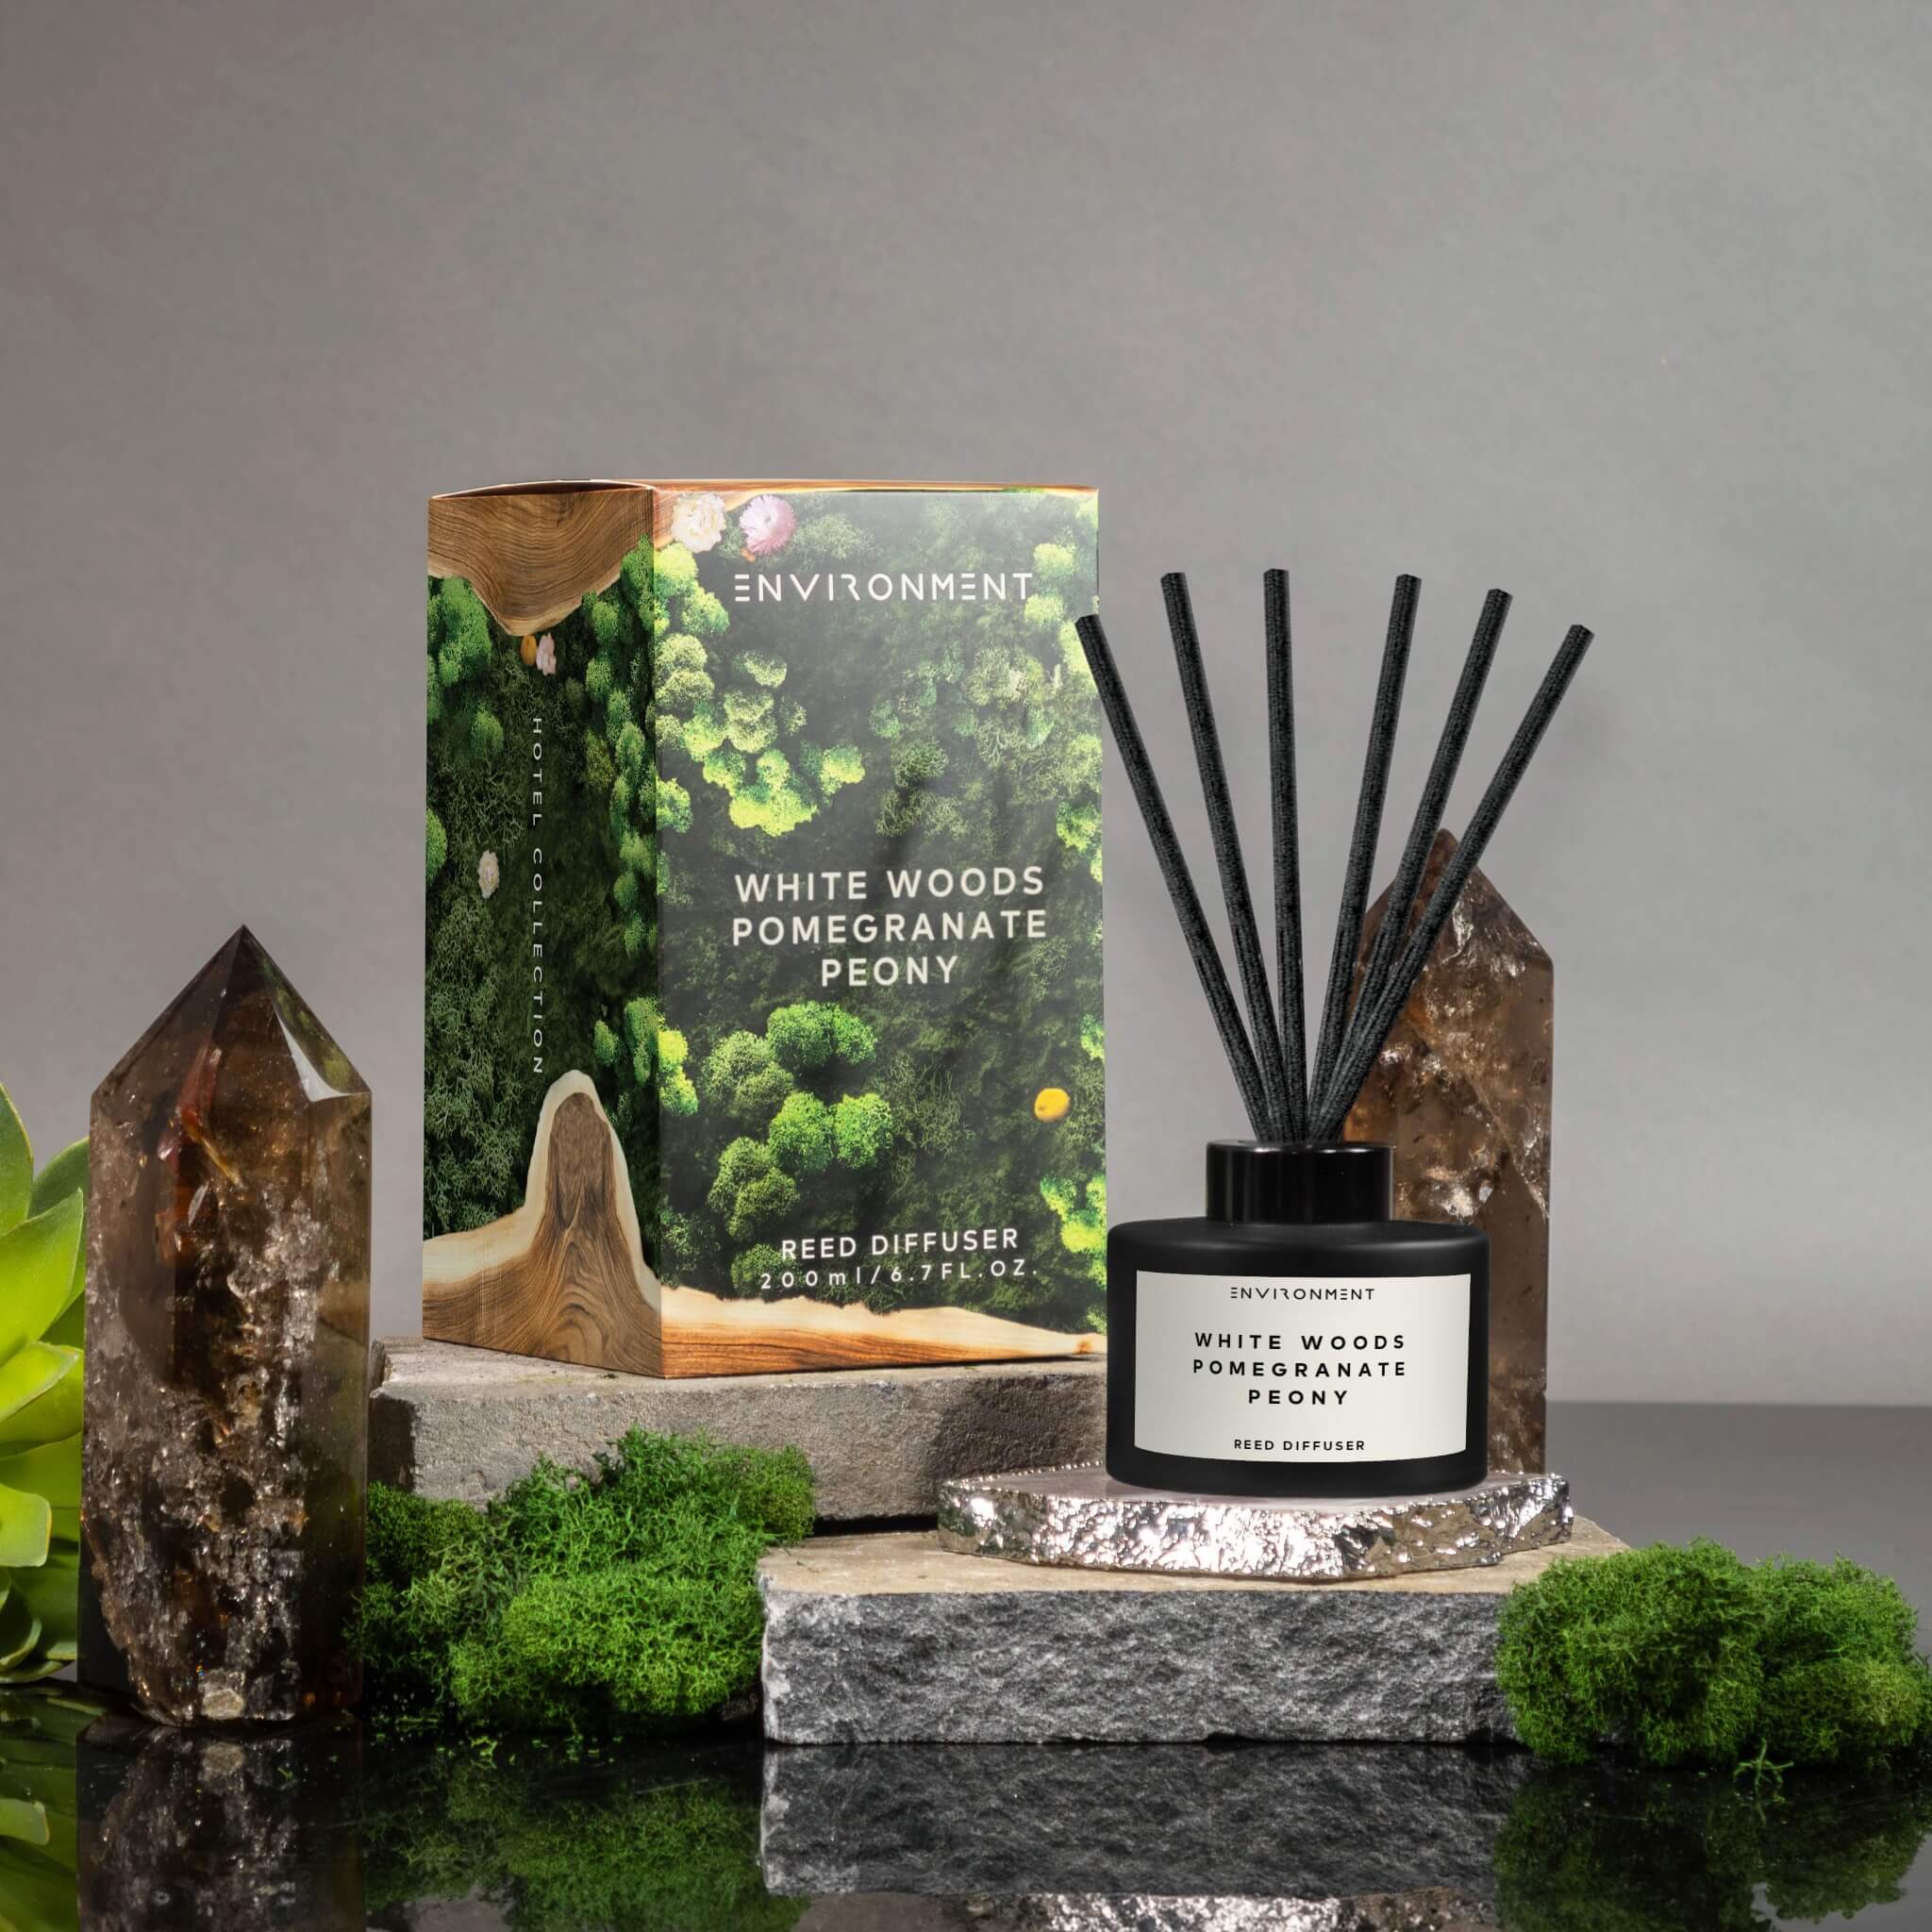 White Woods | Pomegranate | Peony Diffuser (Inspired by The Aria Hotel®)